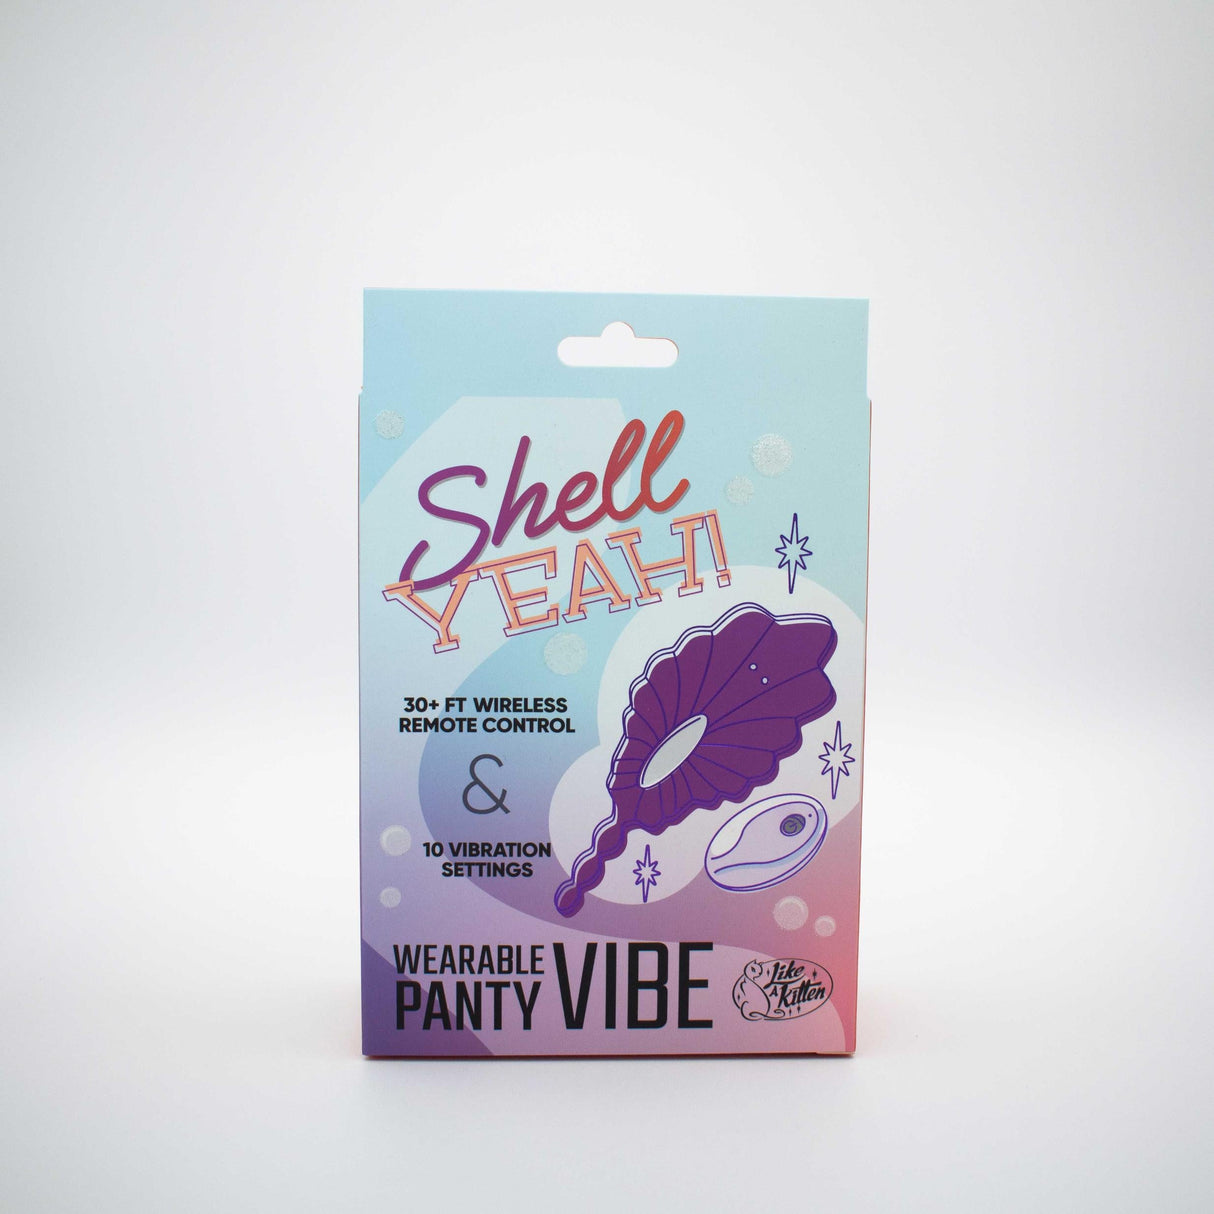 Shell Yeah! Remote Controlled Wearable Panty Vibrator